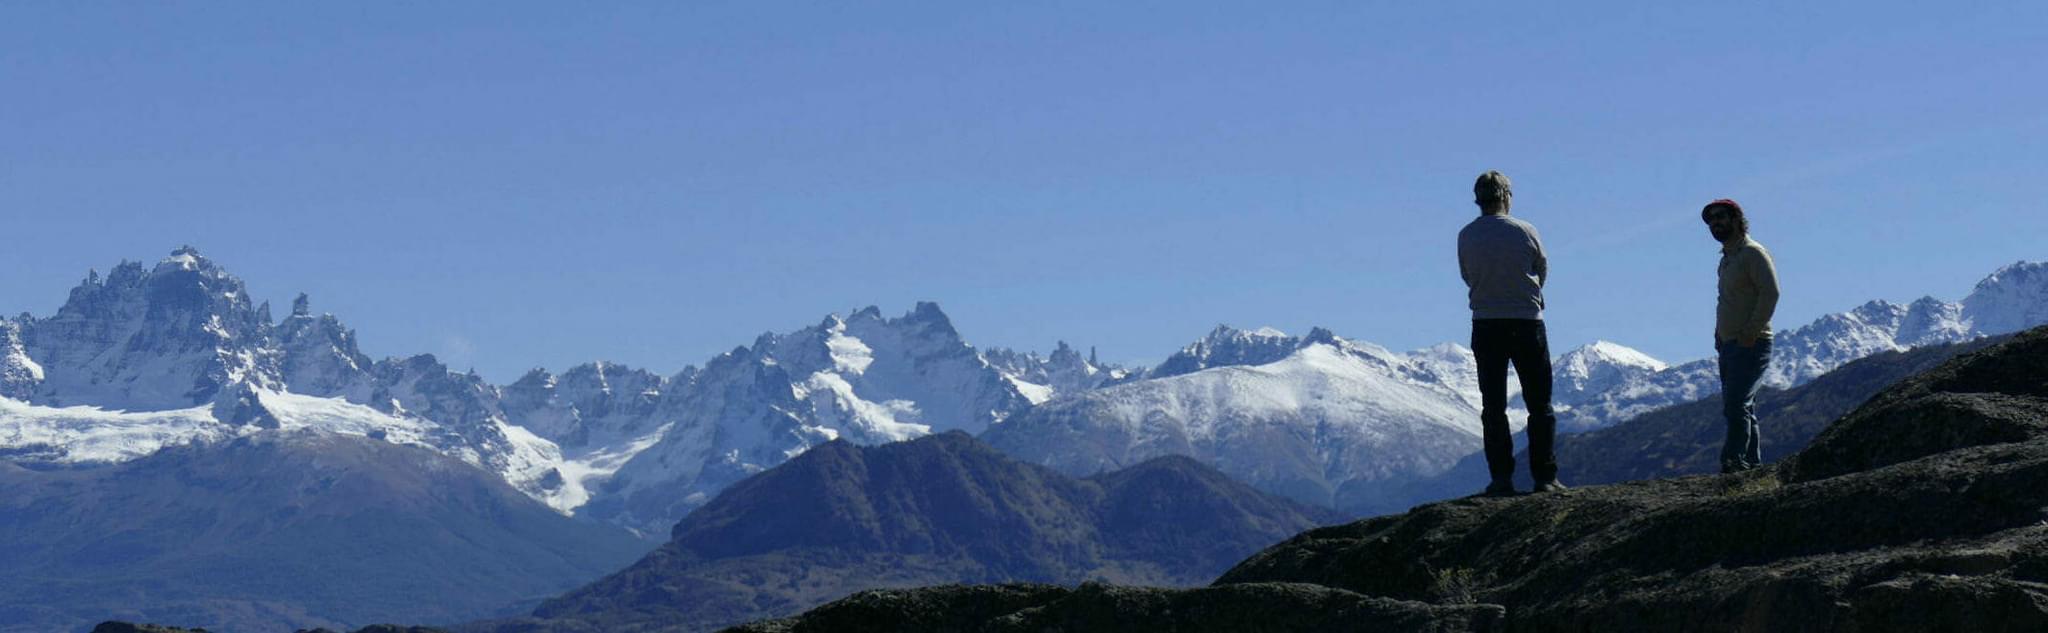 Chile patagonia aysen cerro castillo two people in silhouette with mountains behind